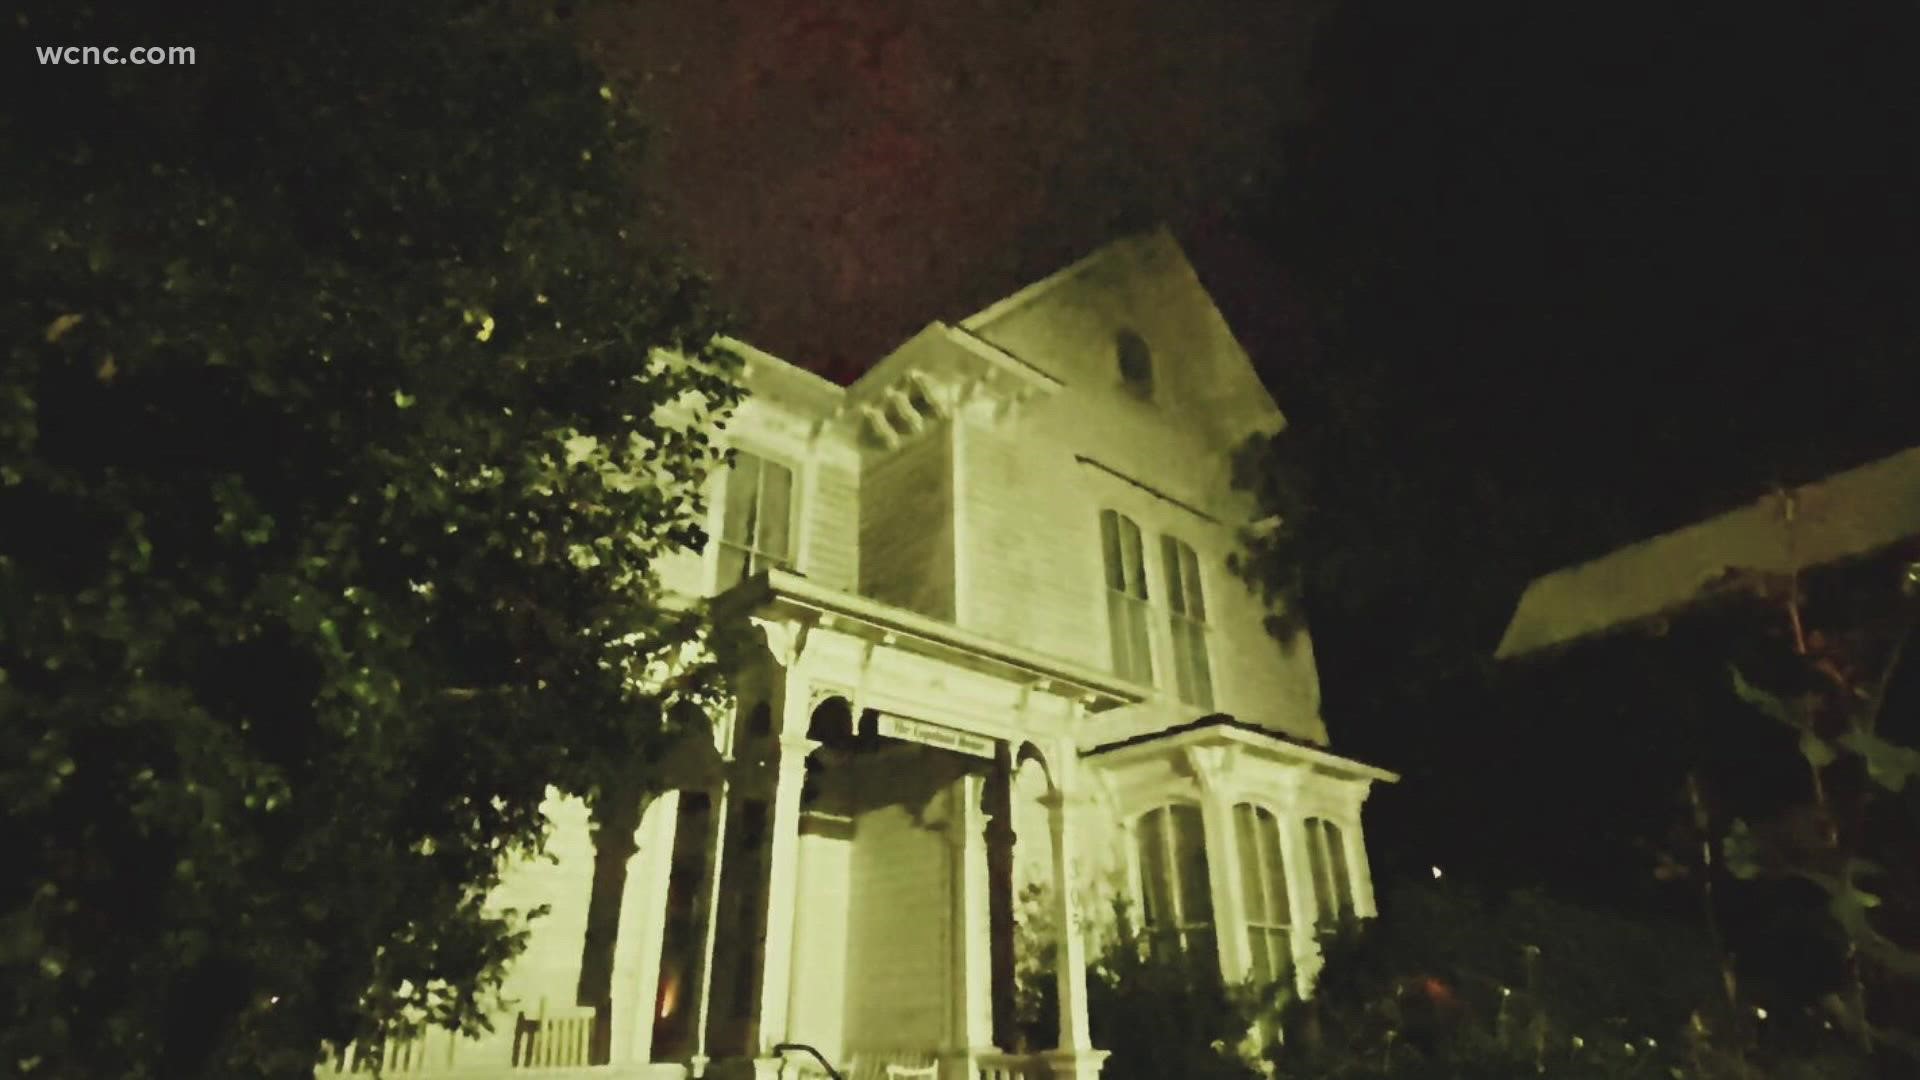 For those seeking Halloween thrills and chills, Davidson has one of the most haunted and creepy trails in North Carolina.